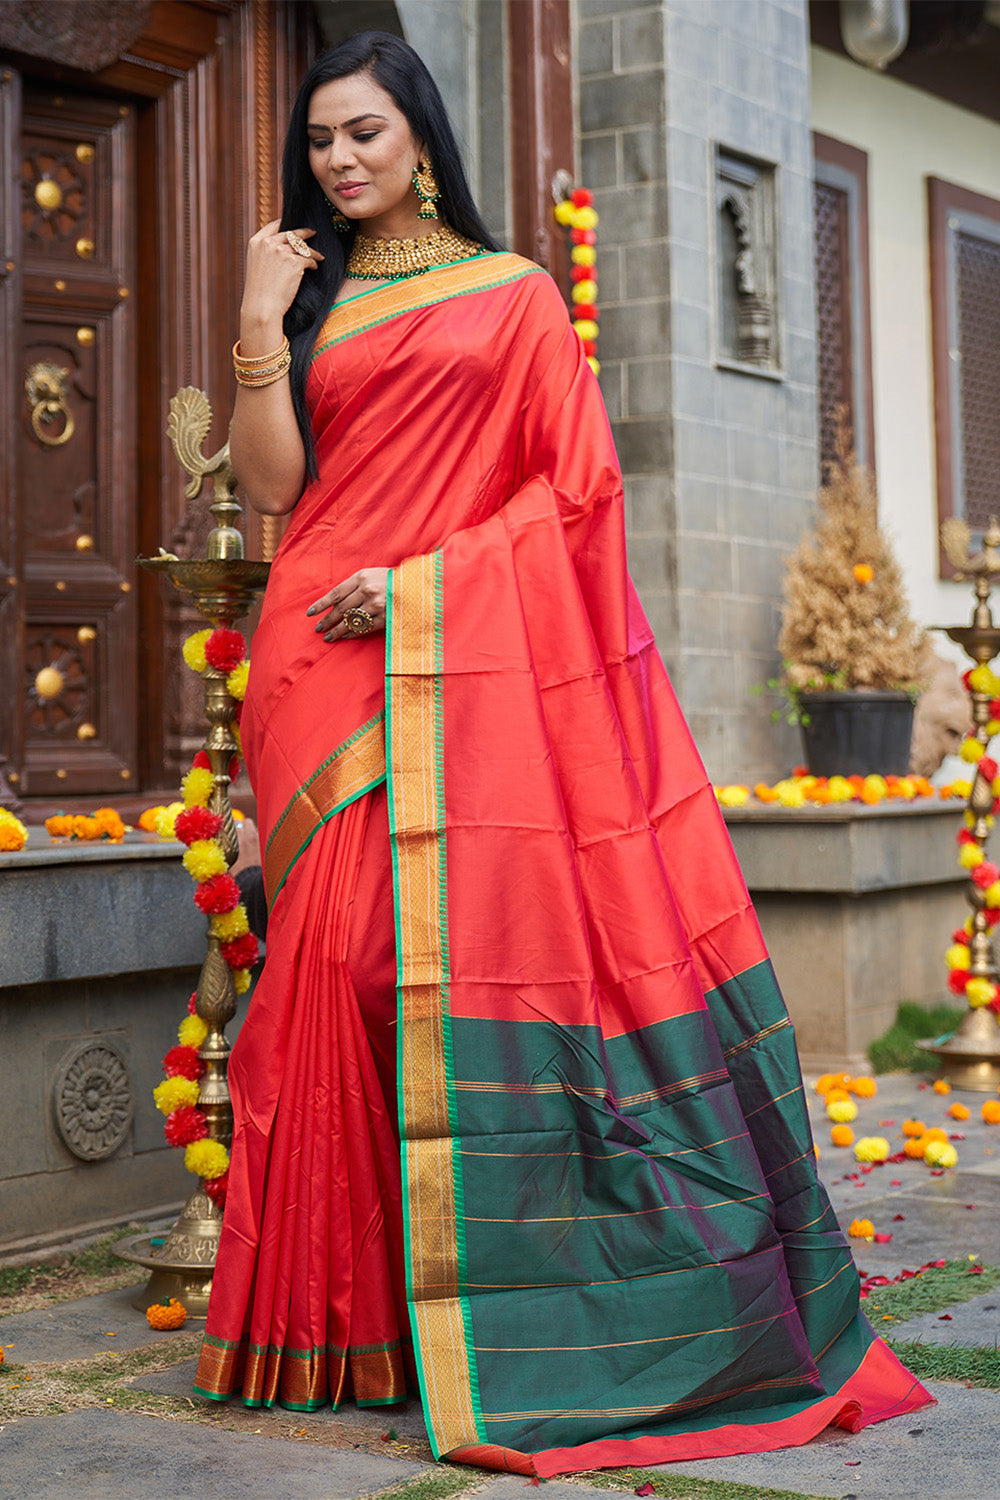 Womens Silk Red Saree With Blouse Piece